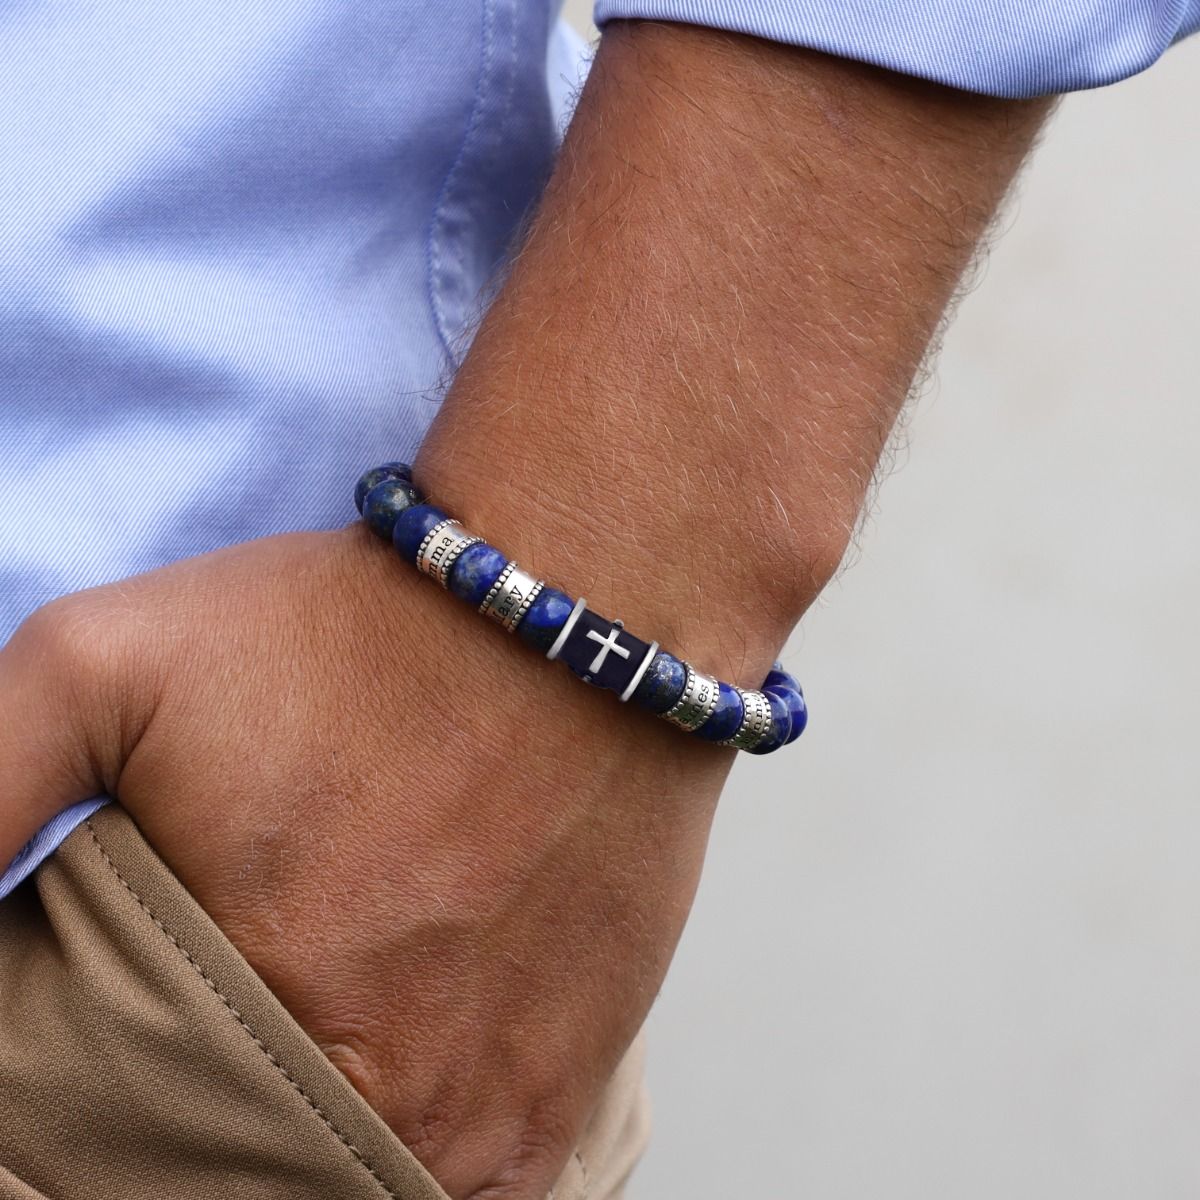 Men's Bracelet with Names on Engraved Silver Beads - Unique Christmas Gifts for Men by Talisa